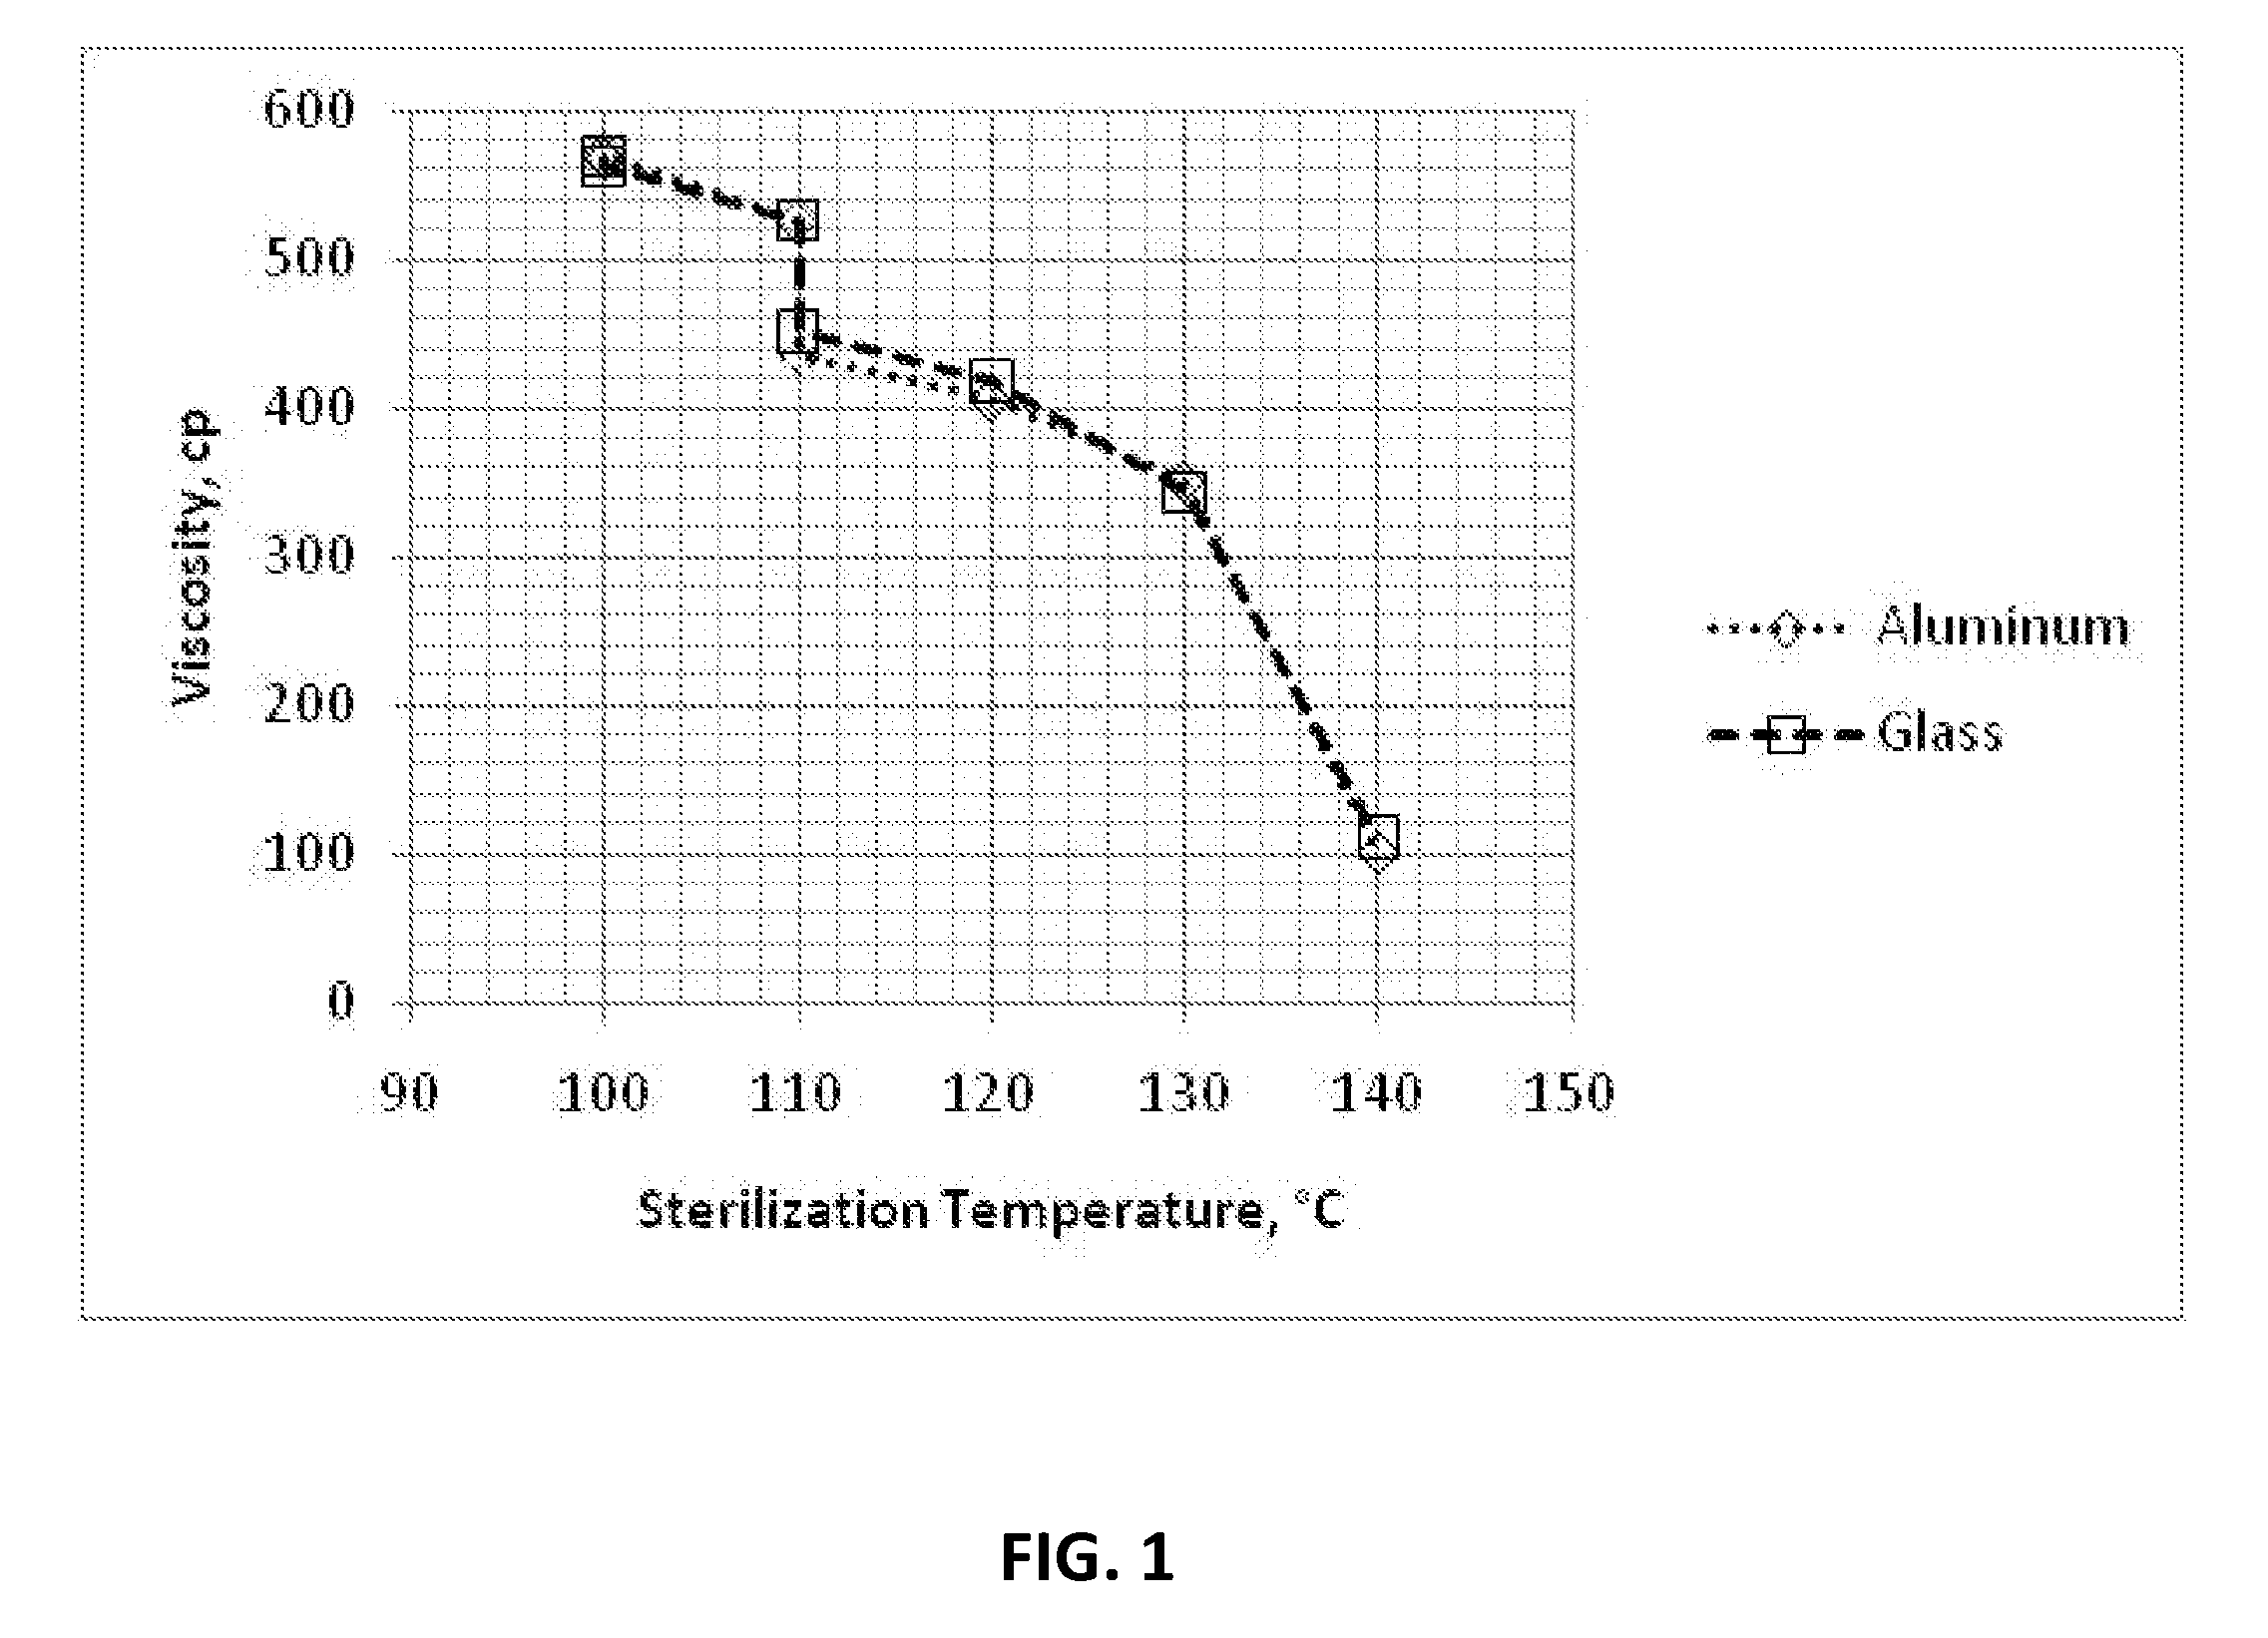 Cyanoacrylate Adhesive Compositions and Devices and Process for Sterilization Thereof